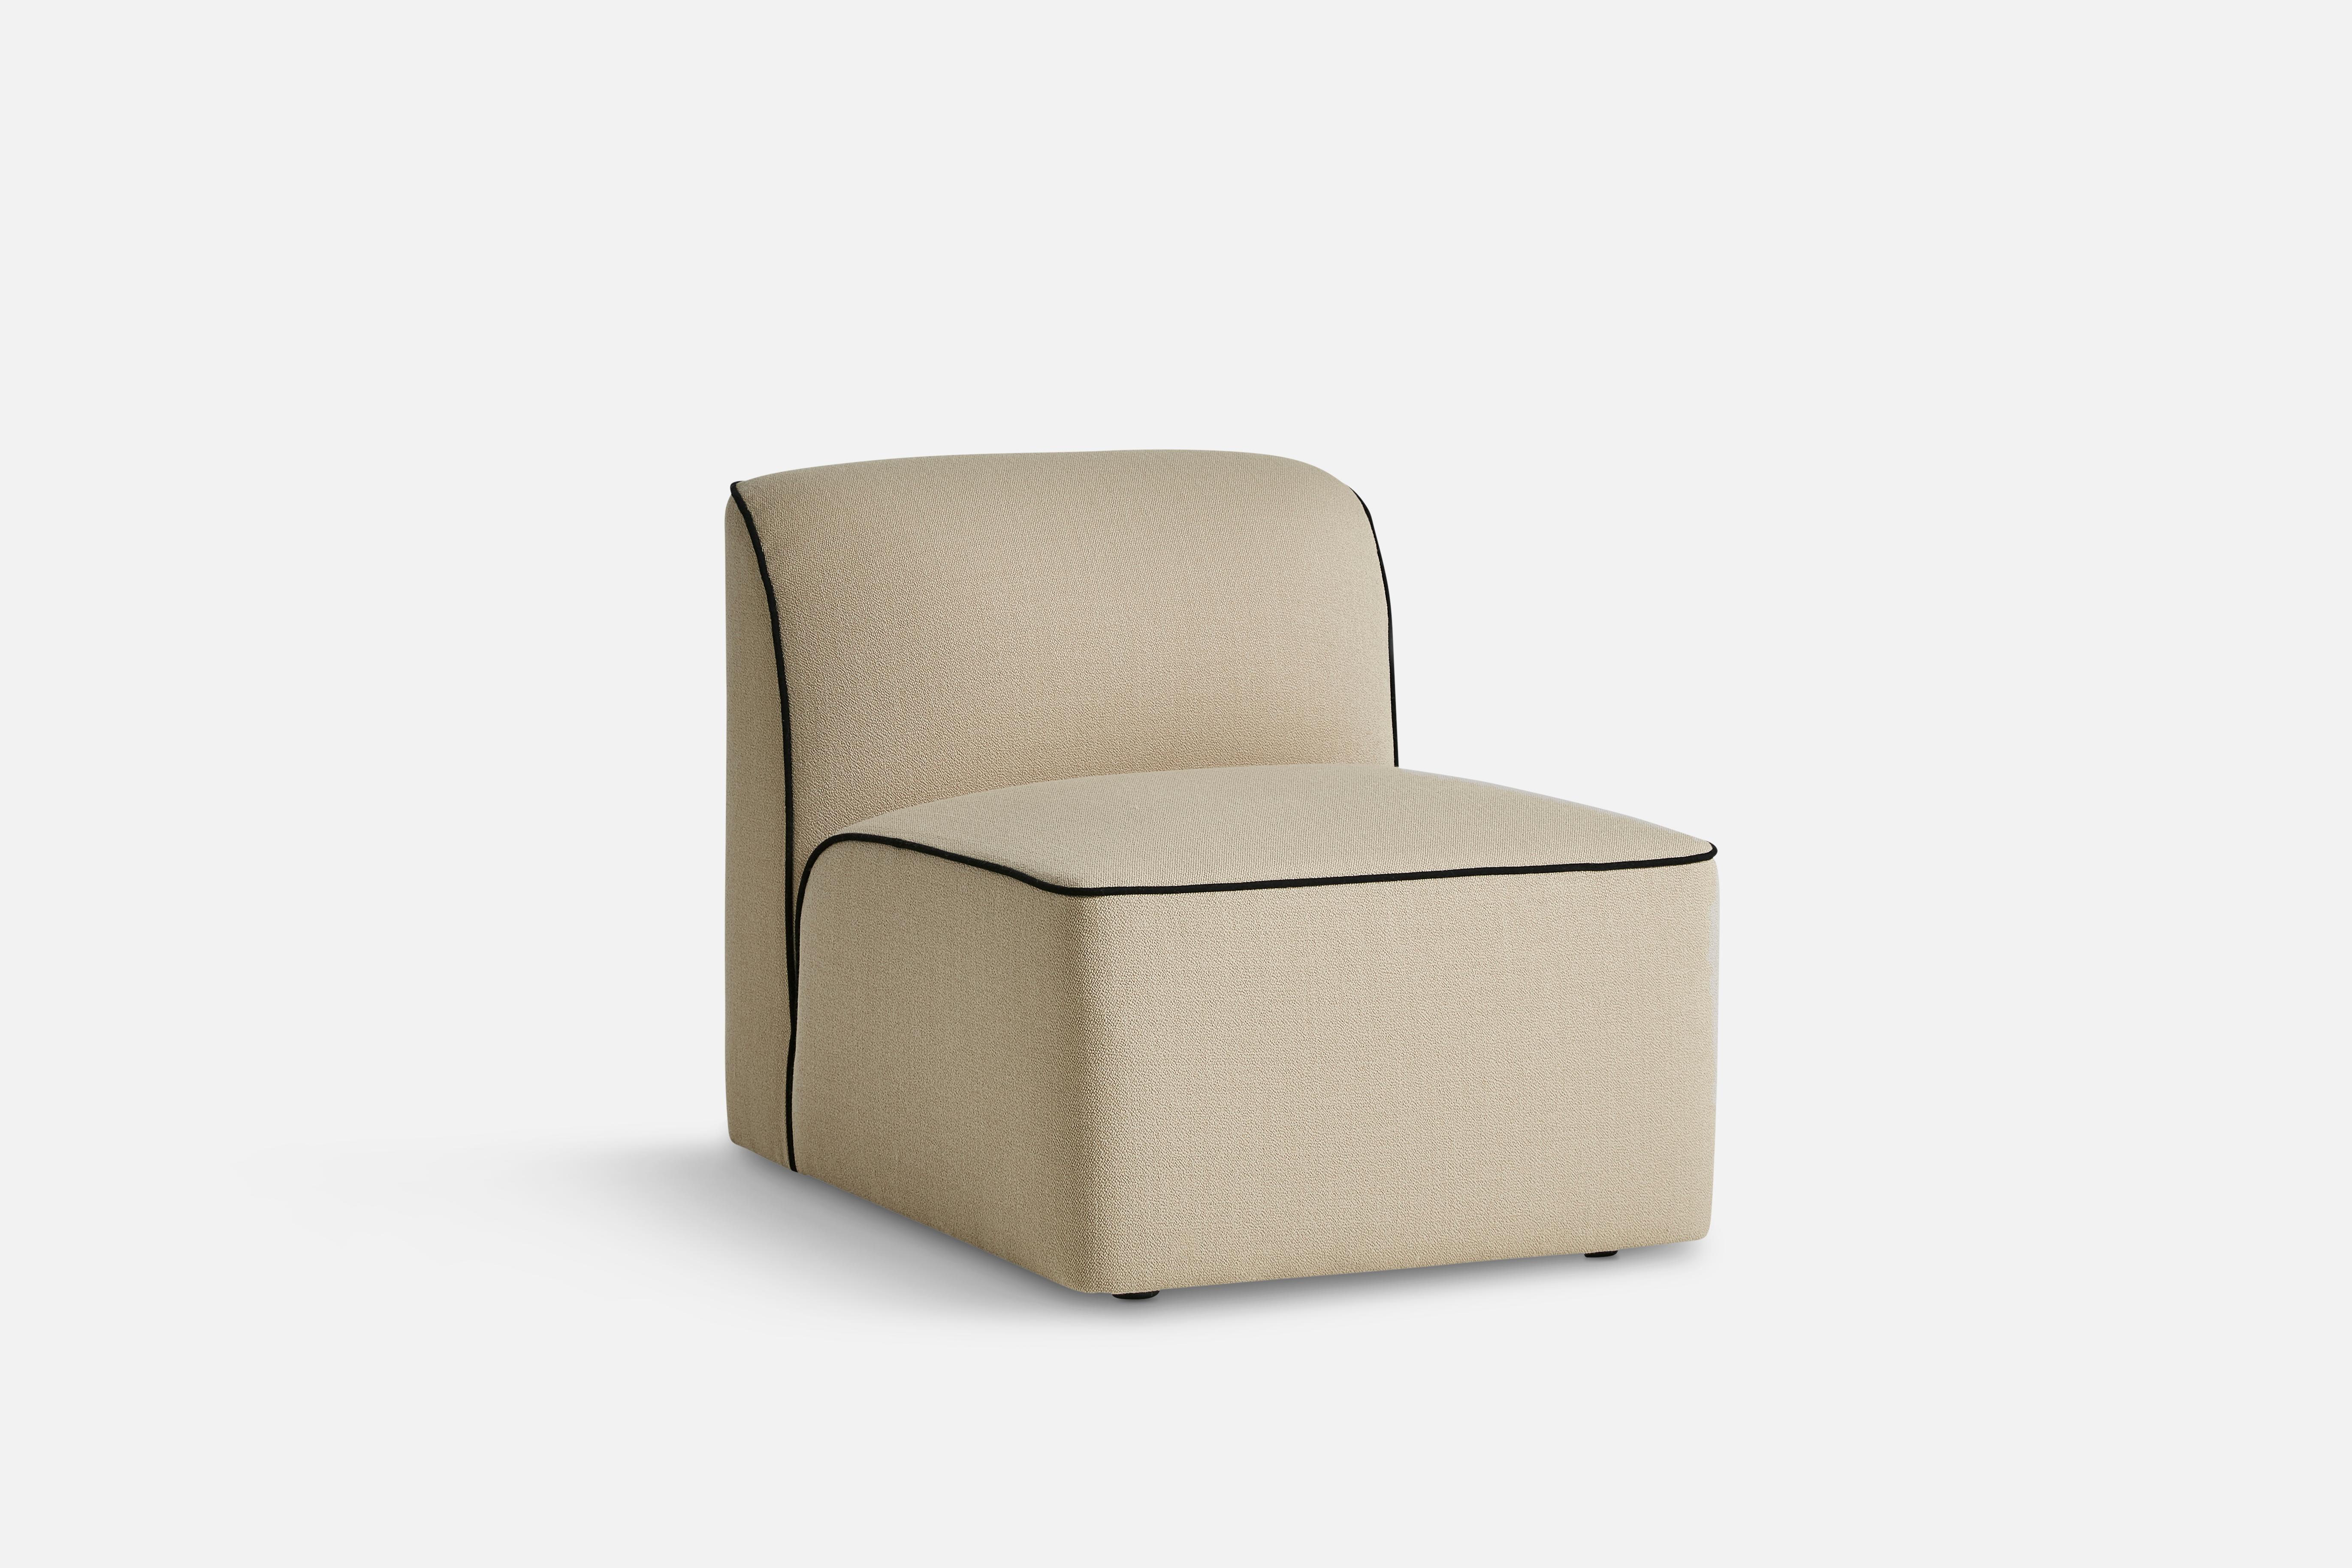 Flora middle module 66 by Yonoh
Materials: plywood, foam, webbing, wood, fabric (Kvadrat Vidar 0323)
Dimensions: D 90 x W 66 x H 70 cm
Also available in different colours and materials. Please contact us.

The founders, Mia and Torben Koed,